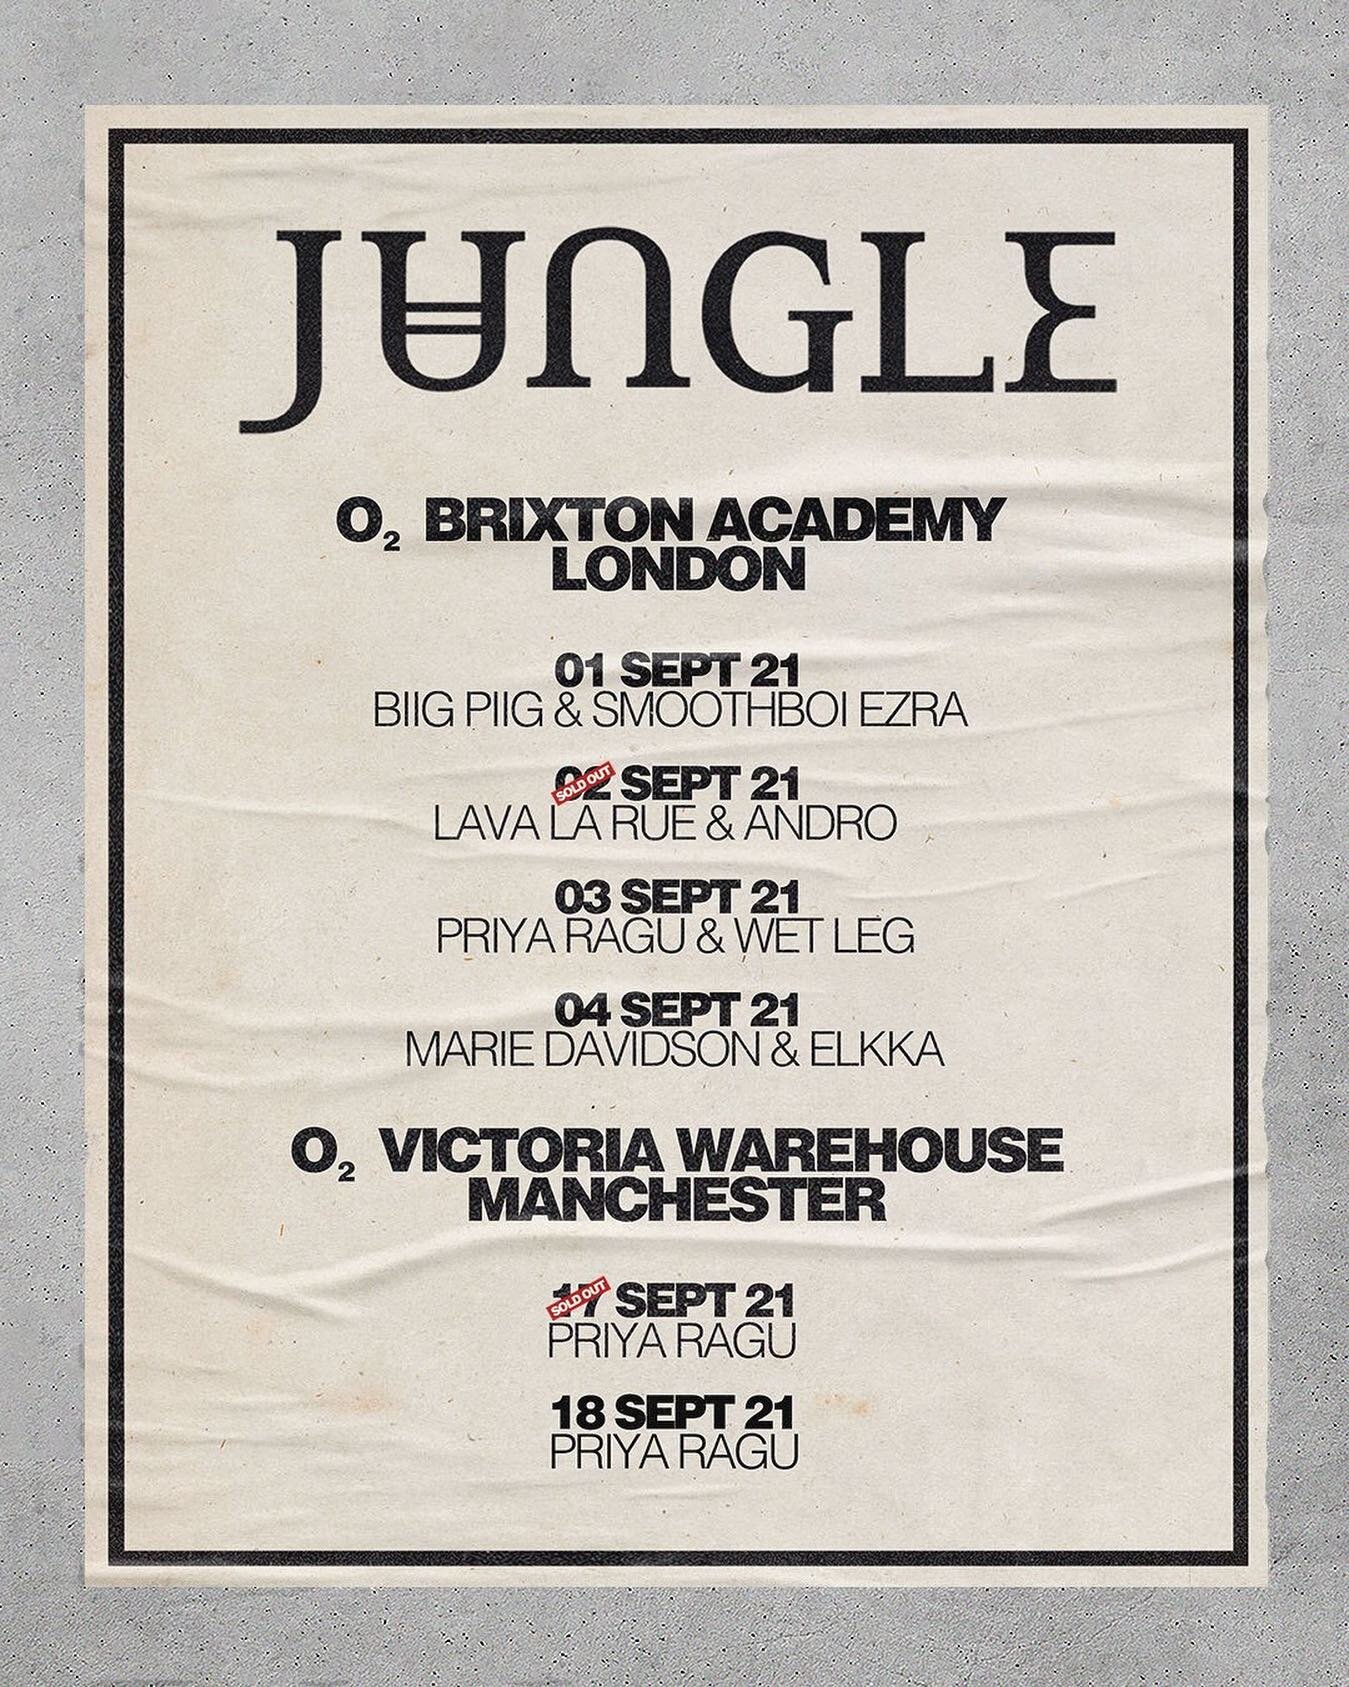 Biig Piig will be supporting Jungle at the Brixton Academy this September- Tickets in Bio. @biig_piig @jungle4eva 

Mgmt// JP Duncan &amp; @victoriaparkey 

#ATCManagement #Jungle #BiigPiig #Concert #LiveMusic #BrixtonAcademy #Music #Events #Tour